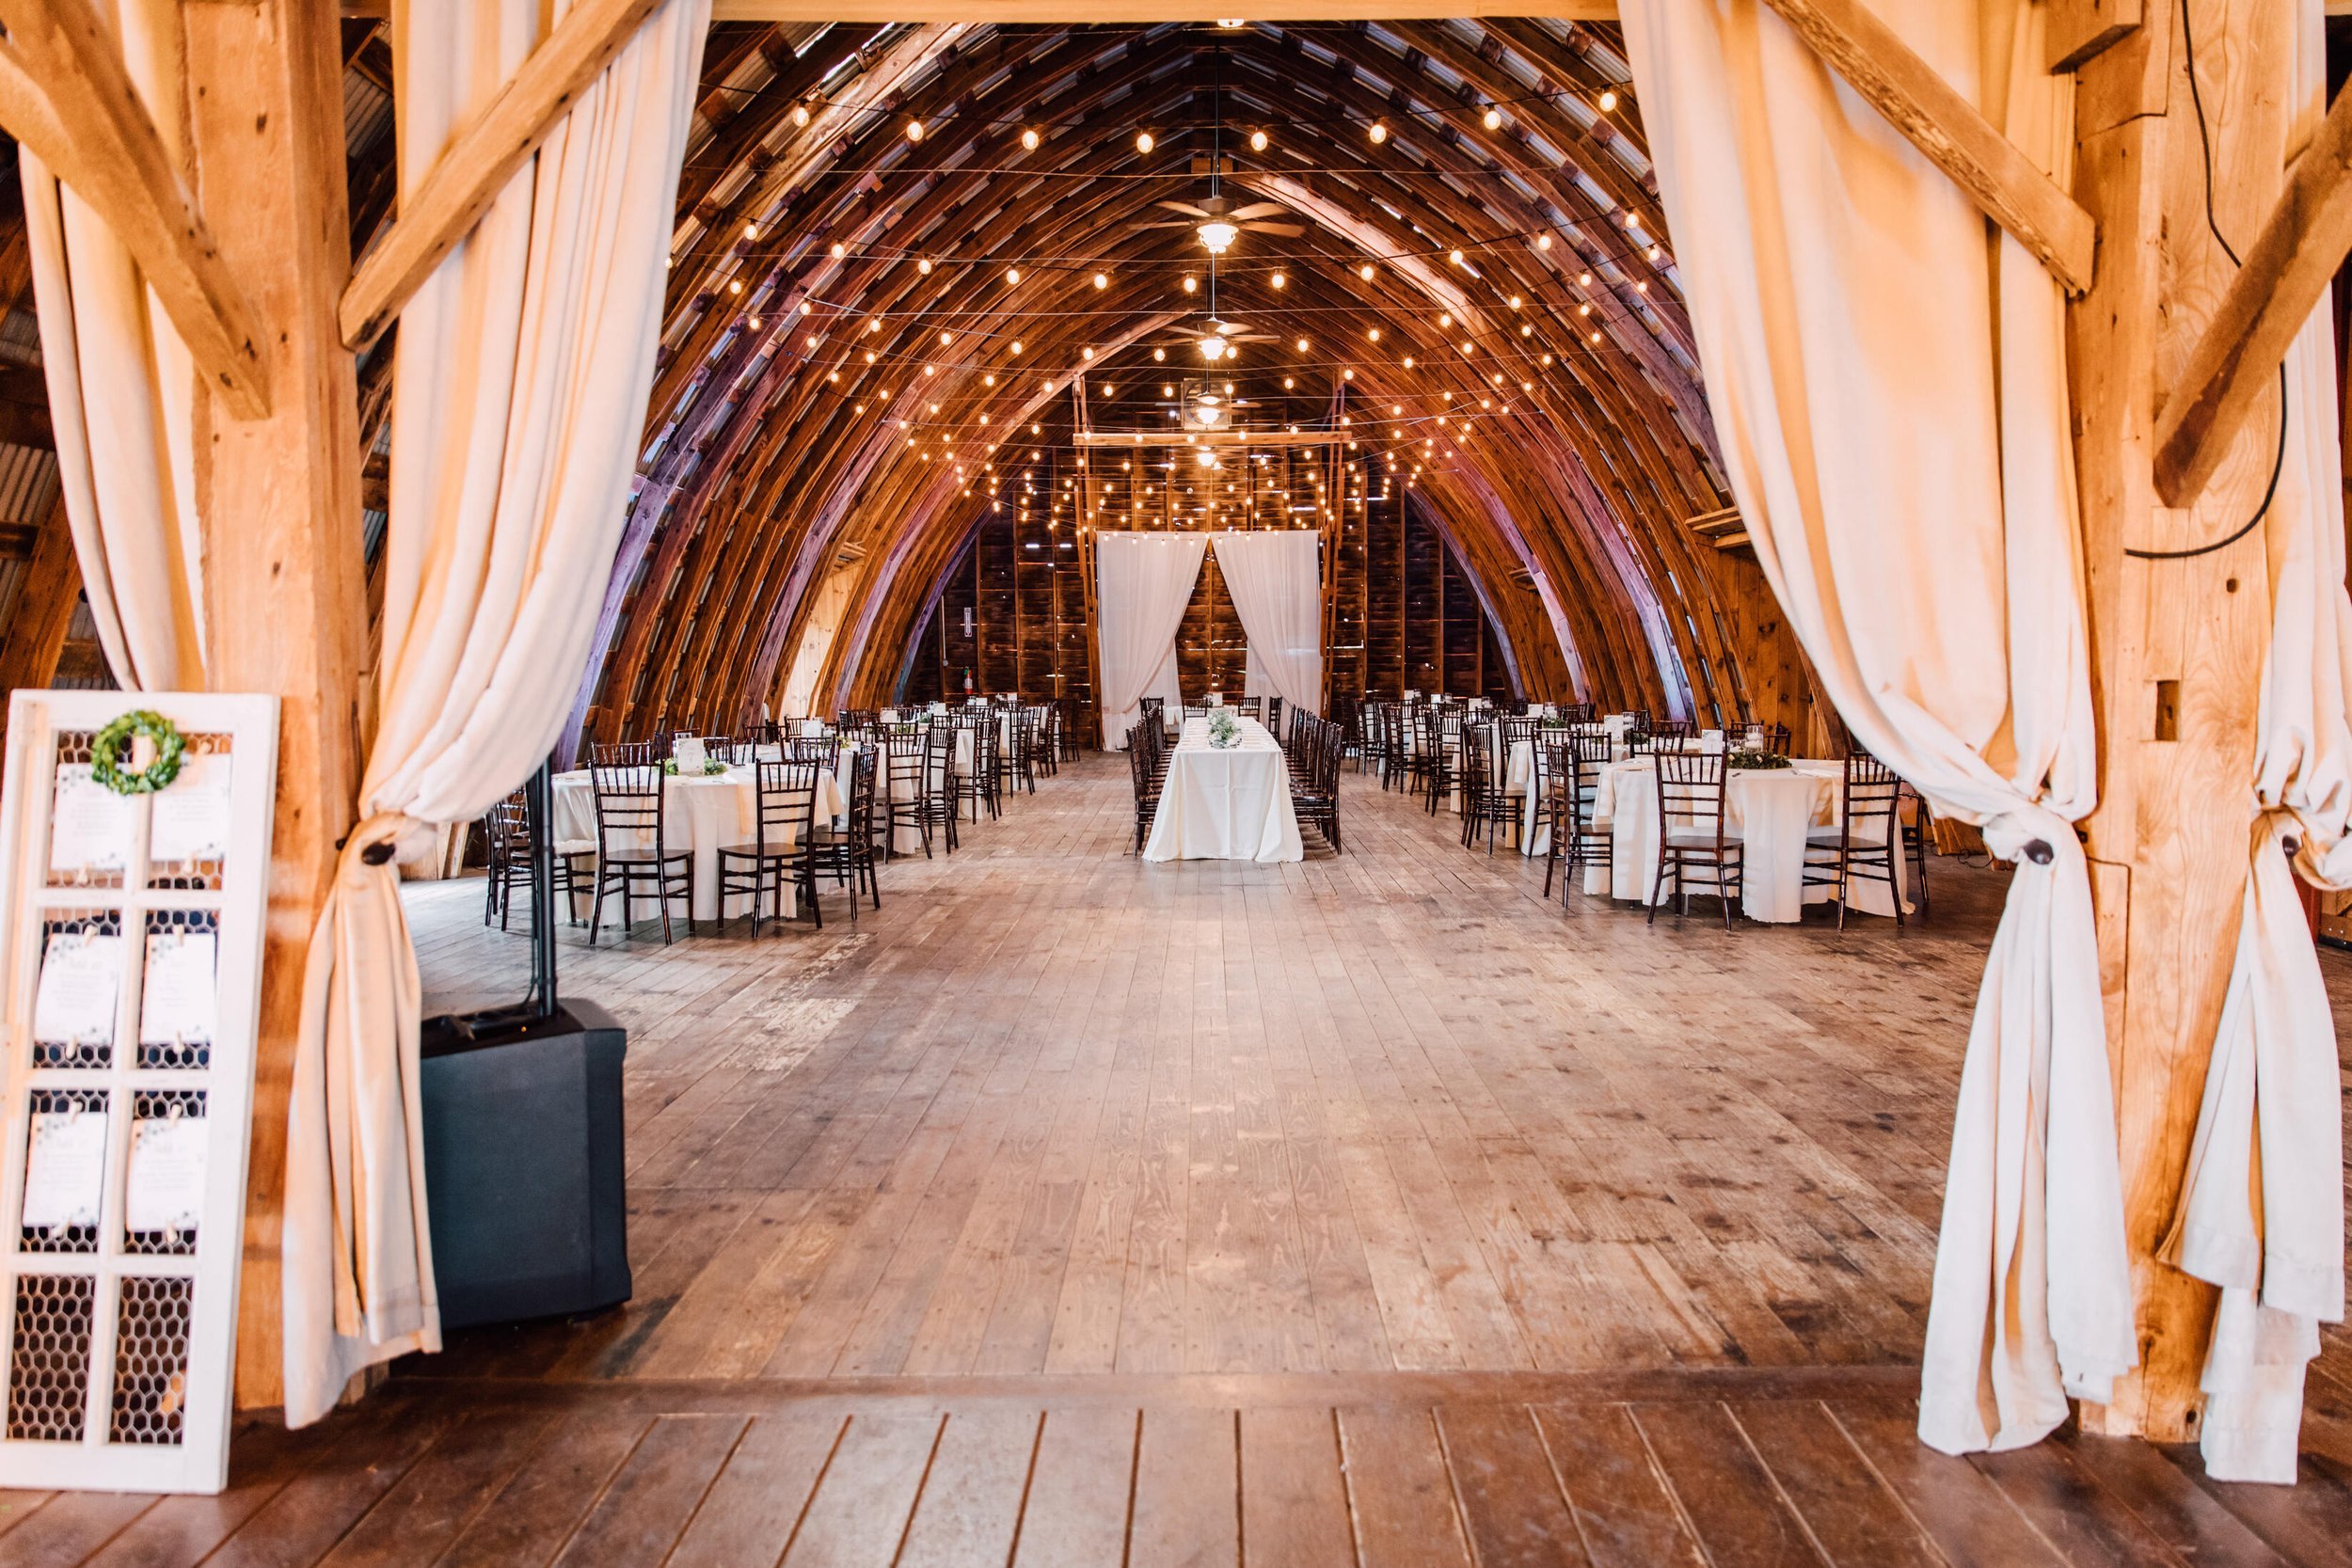  A view from the entrance of the wedding venue set up with tables, chairs, and barn wedding decor 